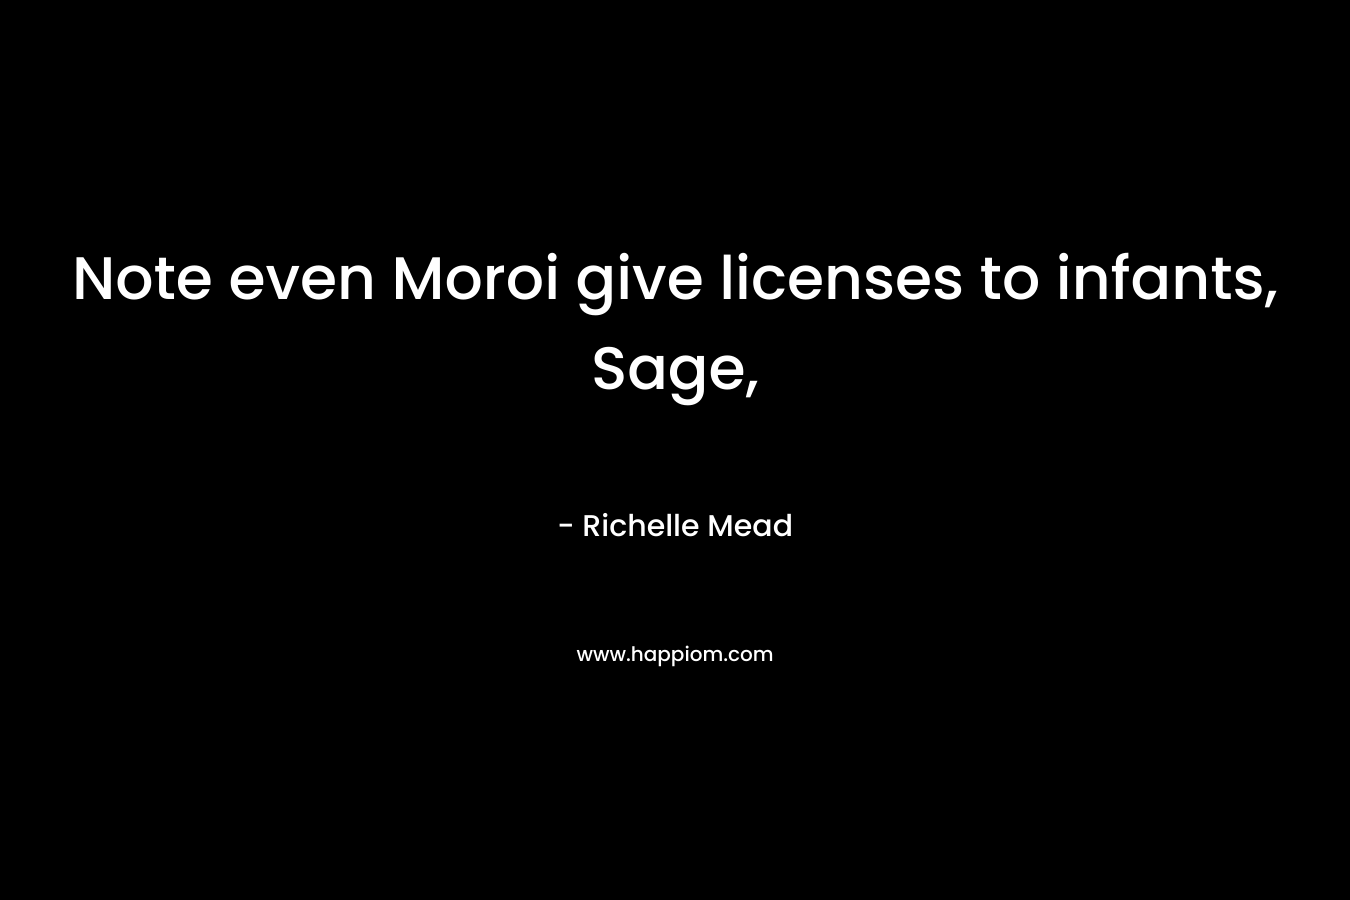 Note even Moroi give licenses to infants, Sage,